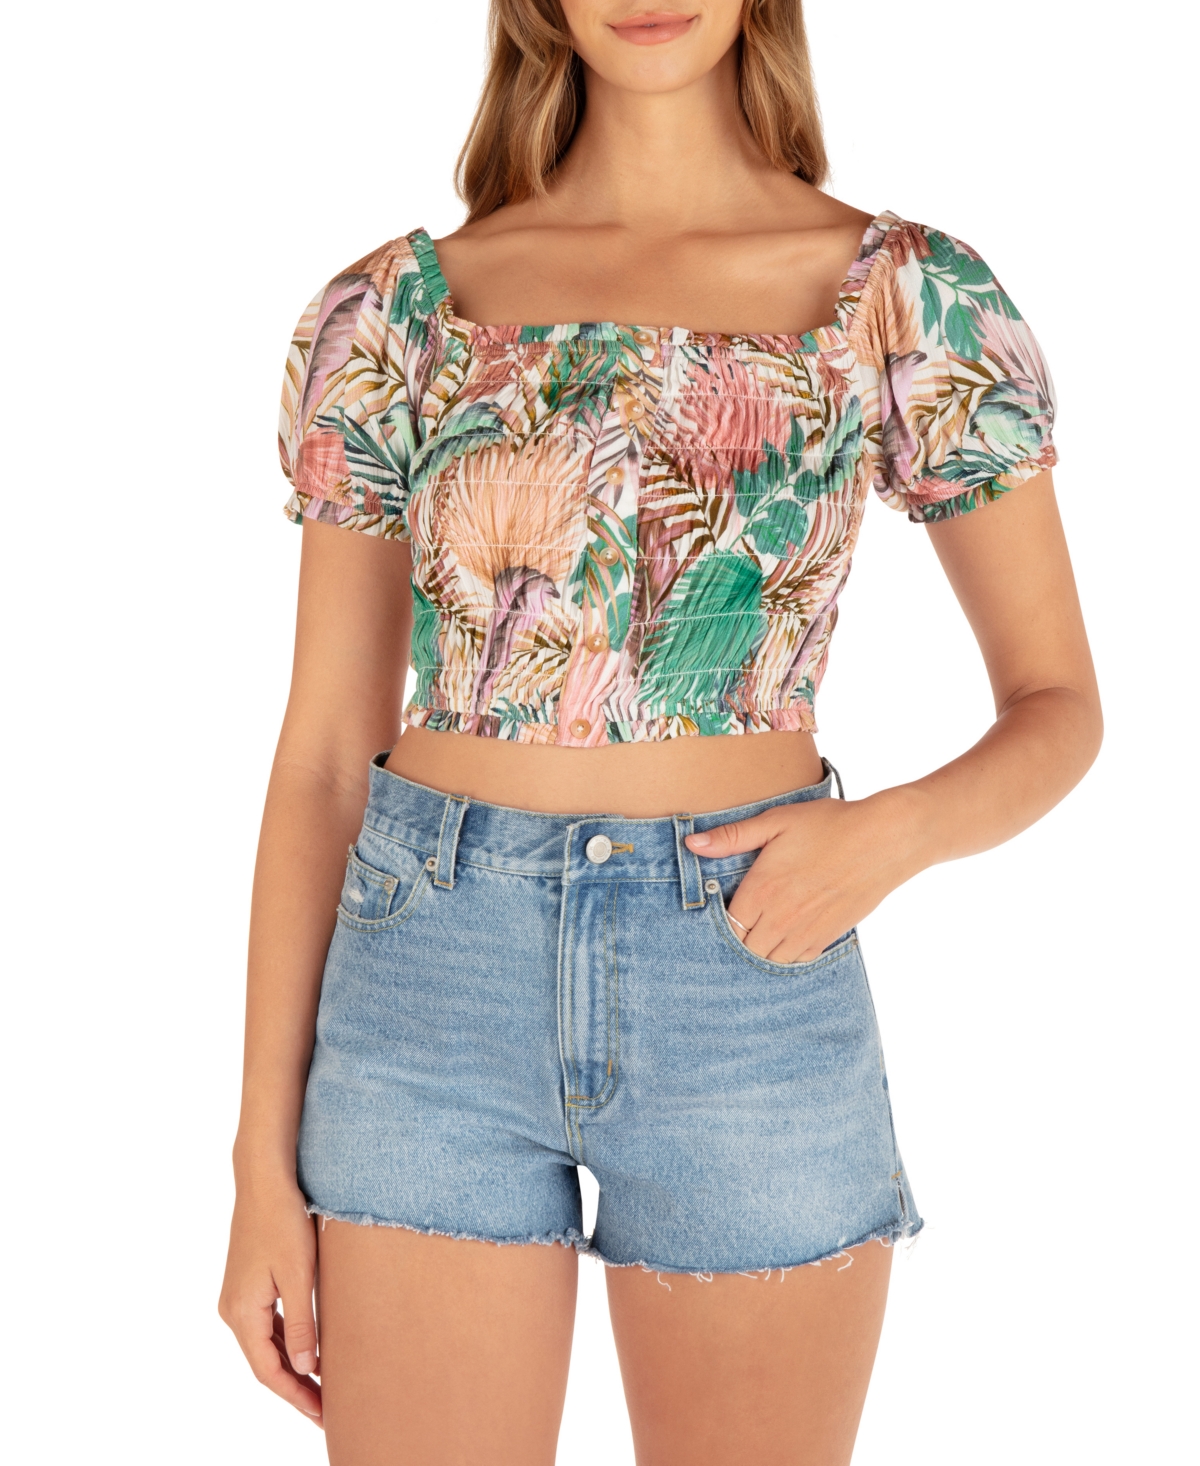 Hurley Juniors' Palmetto Sunset Smocked Crop Top In Print